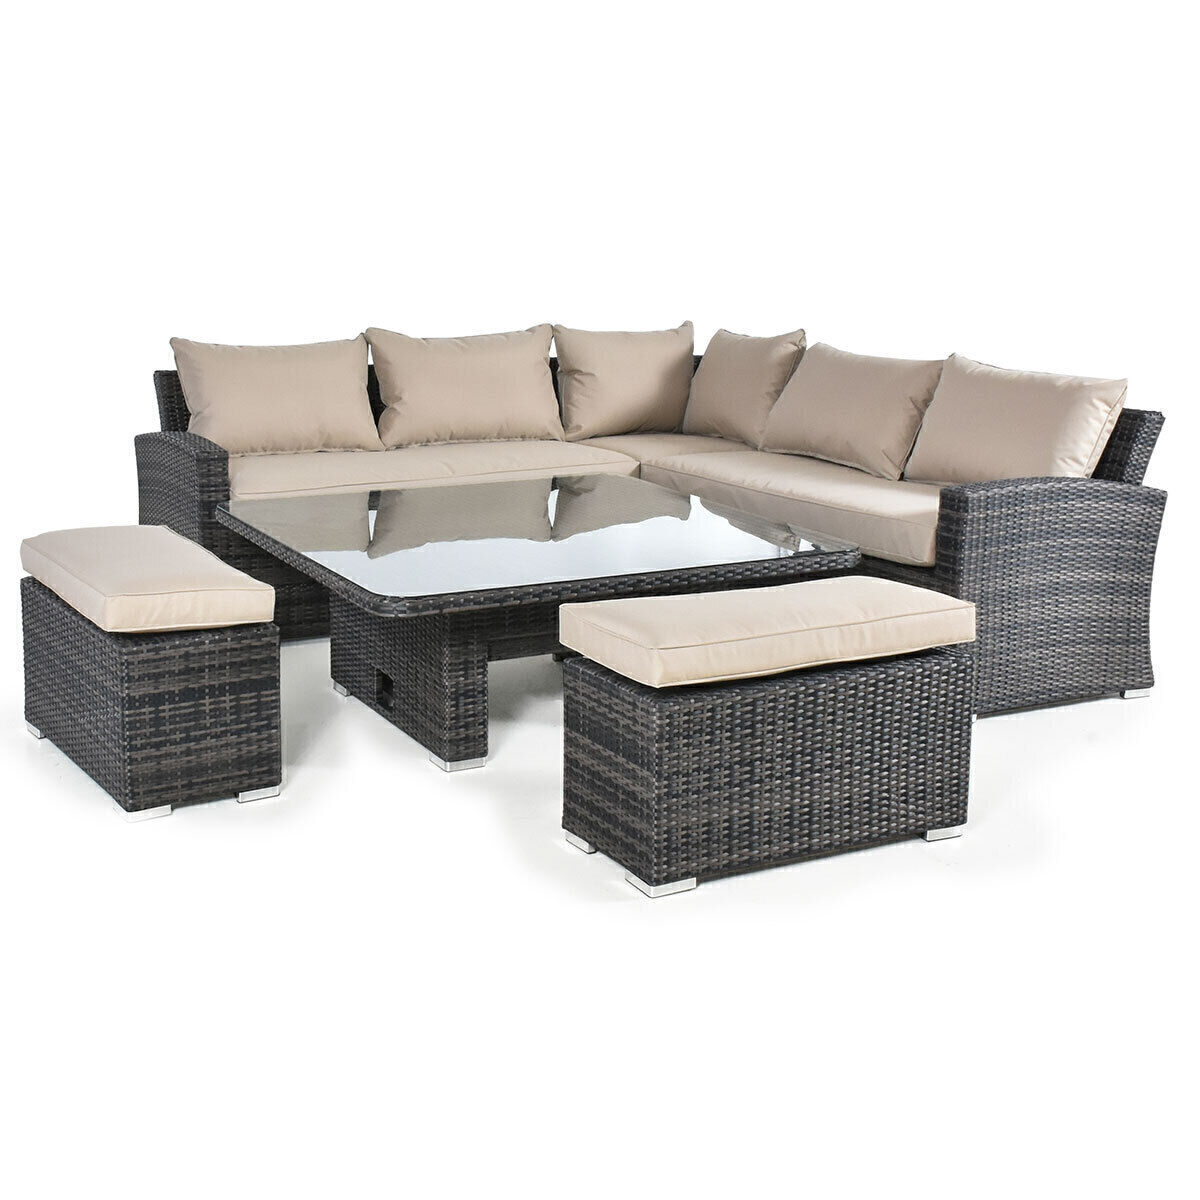 Maze - Deluxe Kingston Rattan Corner Dining Set with Rising Table - Brown product image